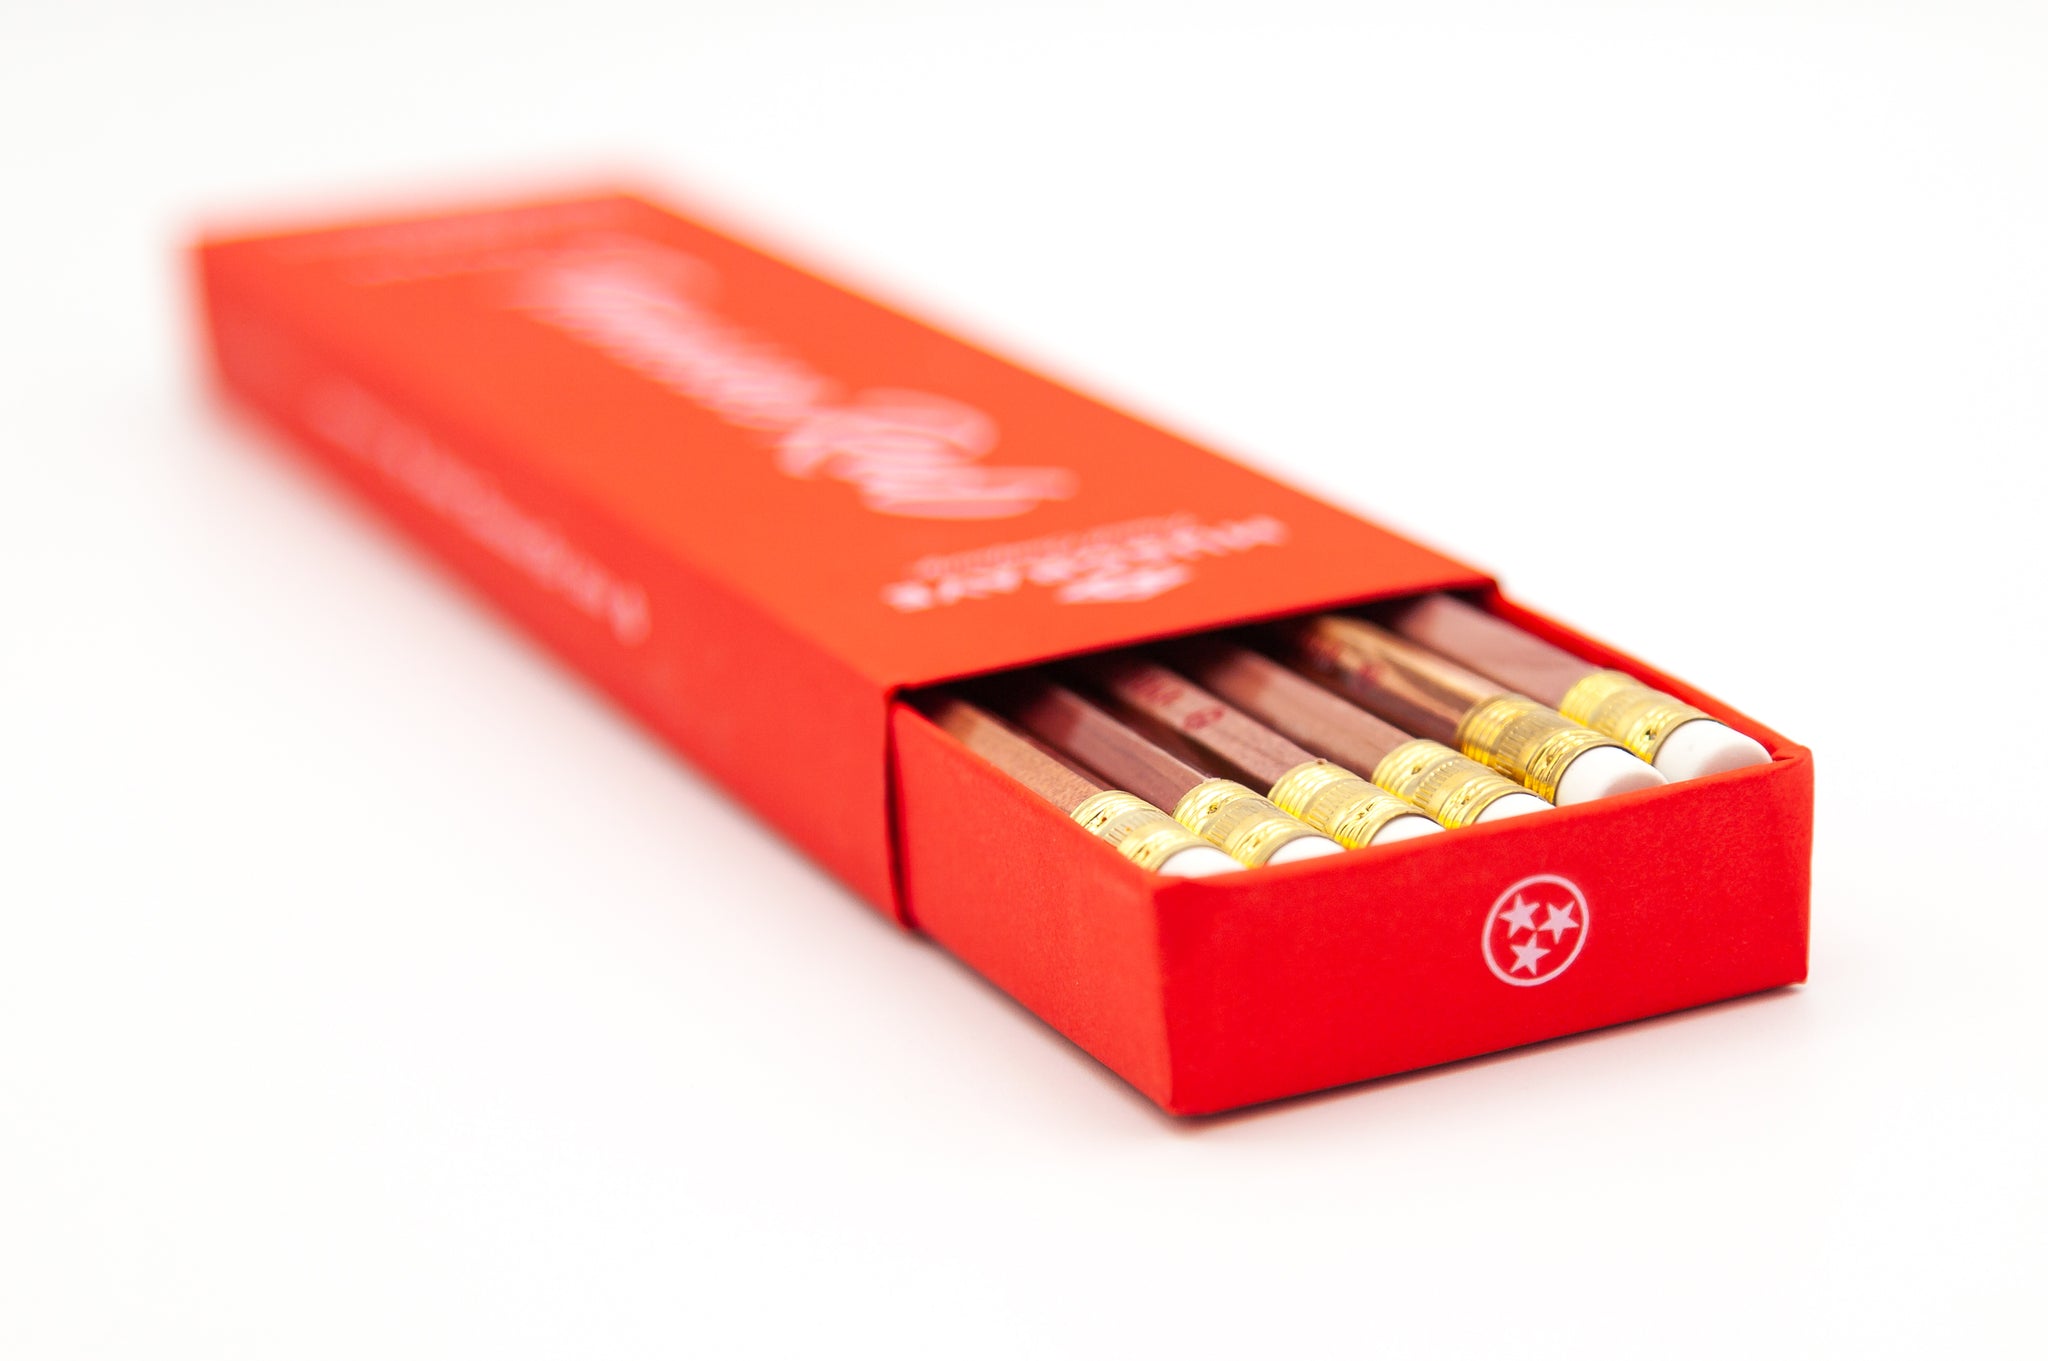 12-pack Tennessee Red Cedar Pencils, Musgrave Pencil Company